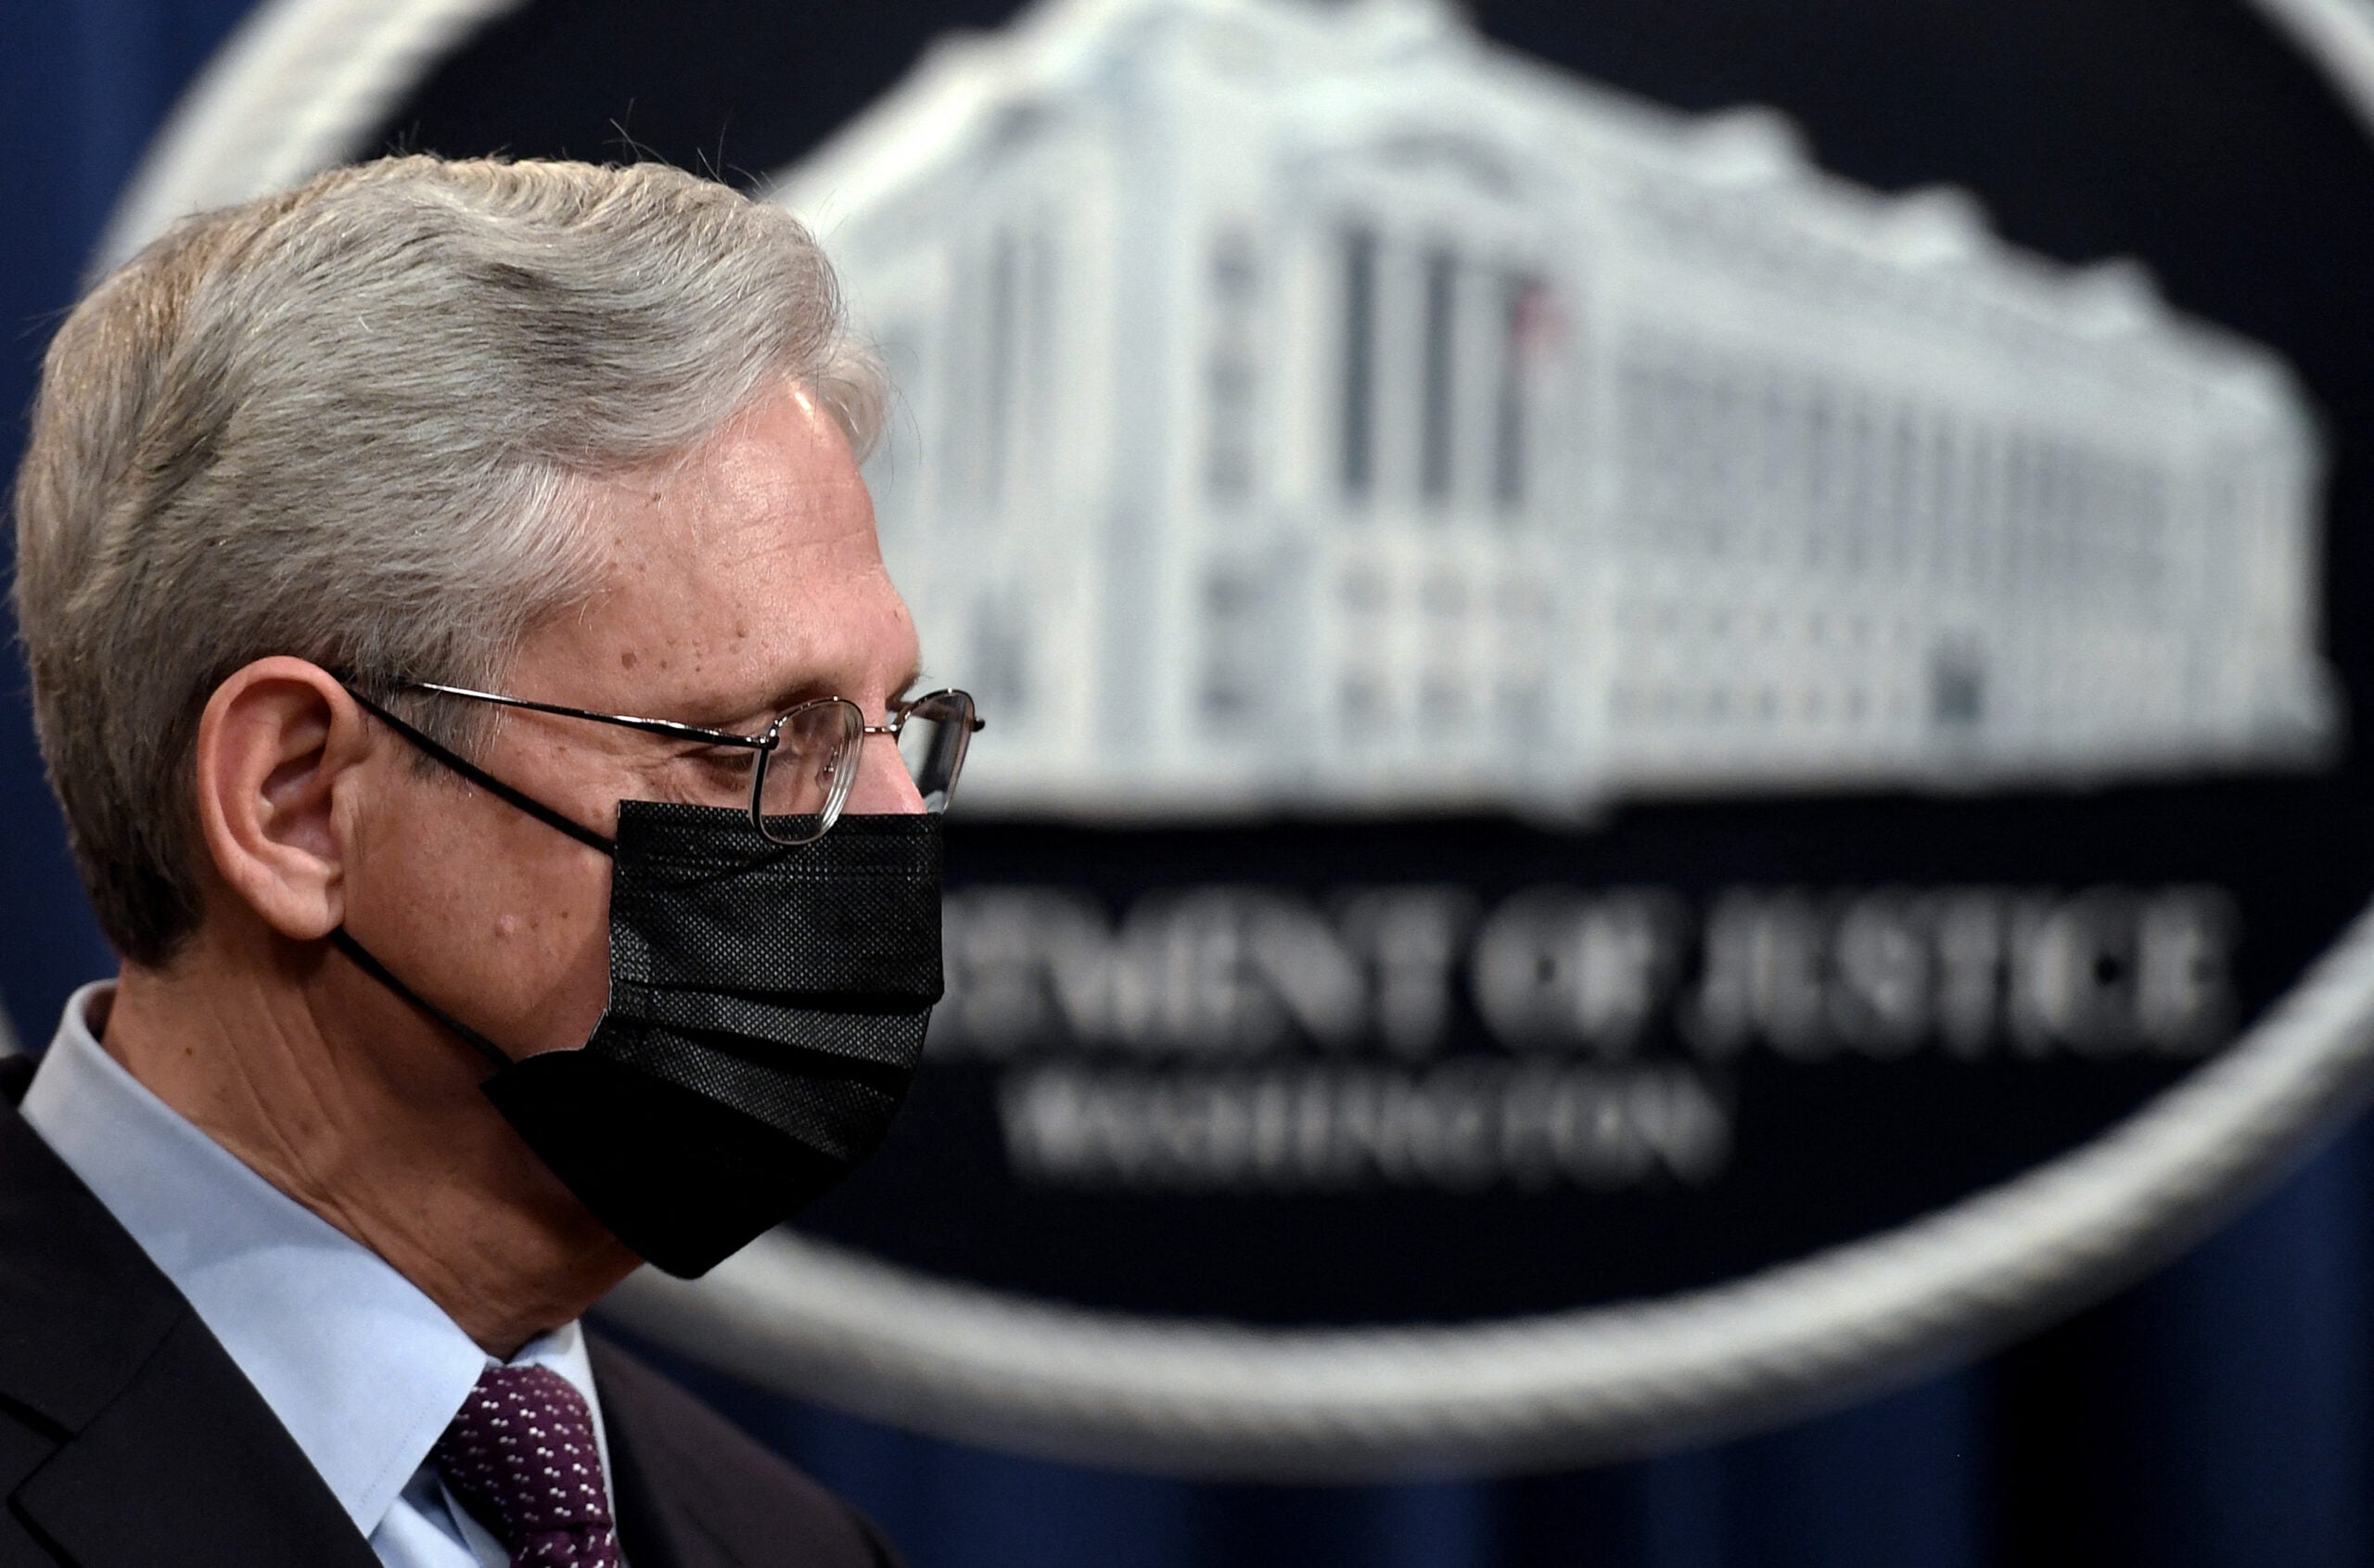 Attorney General Merrick Garland listens during a news conference over ransomware cyberattacks, at the Department of Justice, in Washington, DC on November 8, 2021.